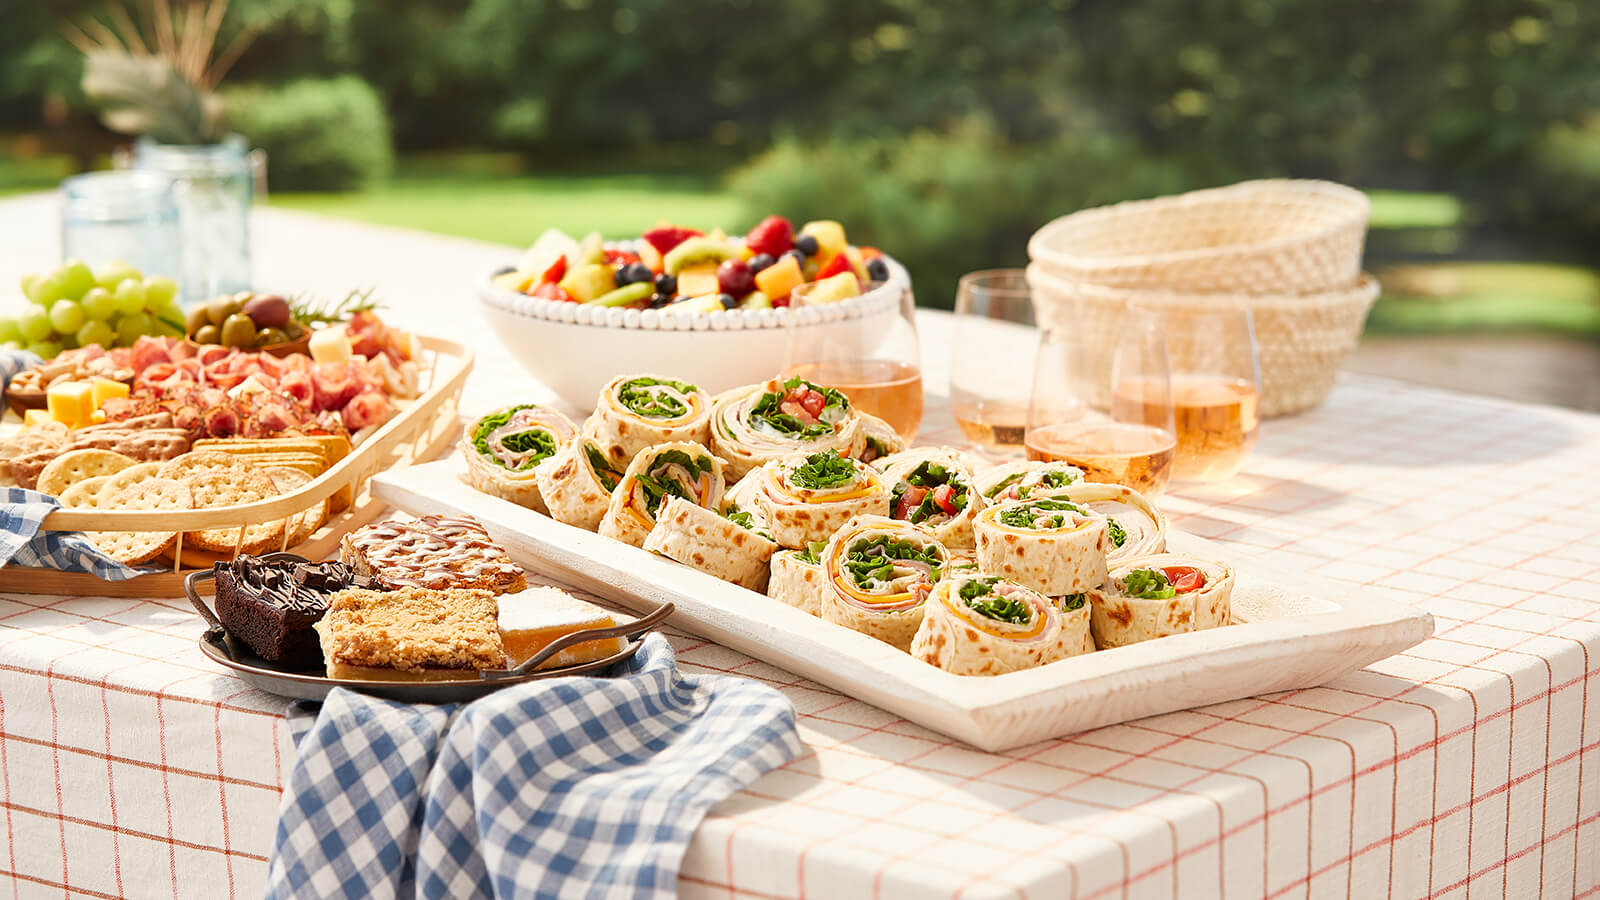 Summer Picnic Meal (Meat & Cheese Pinwheel)